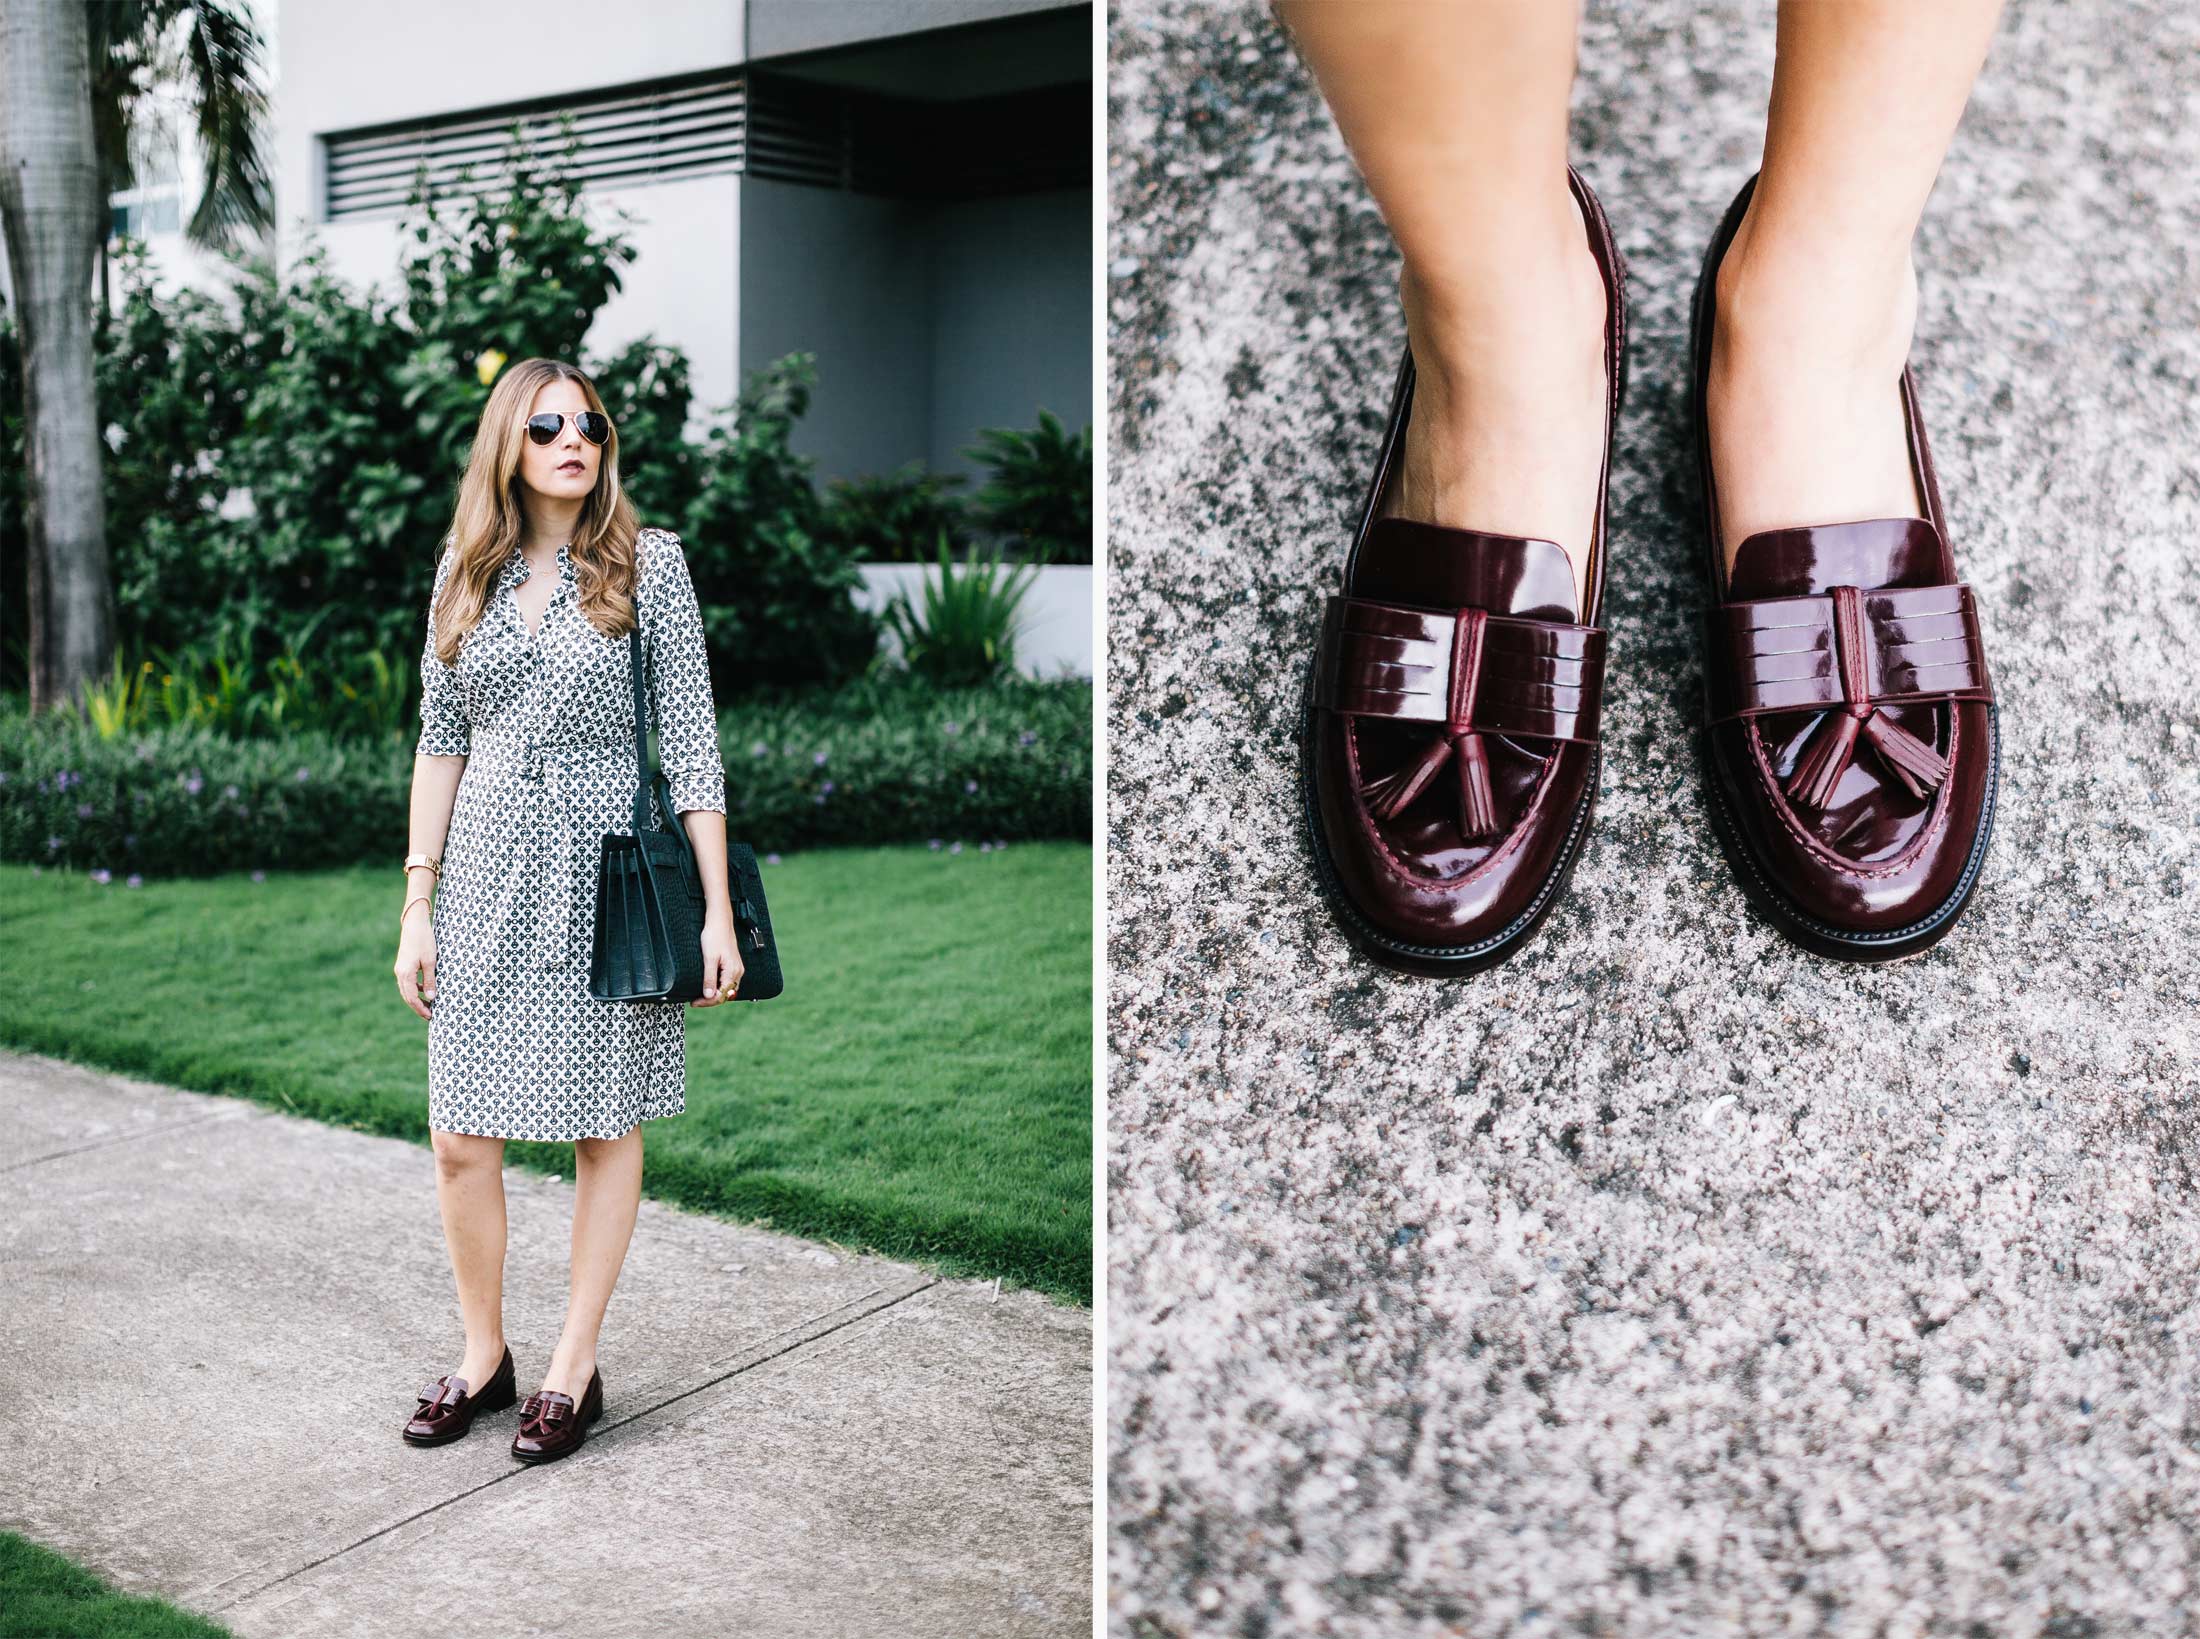 How to make loafers look feminine